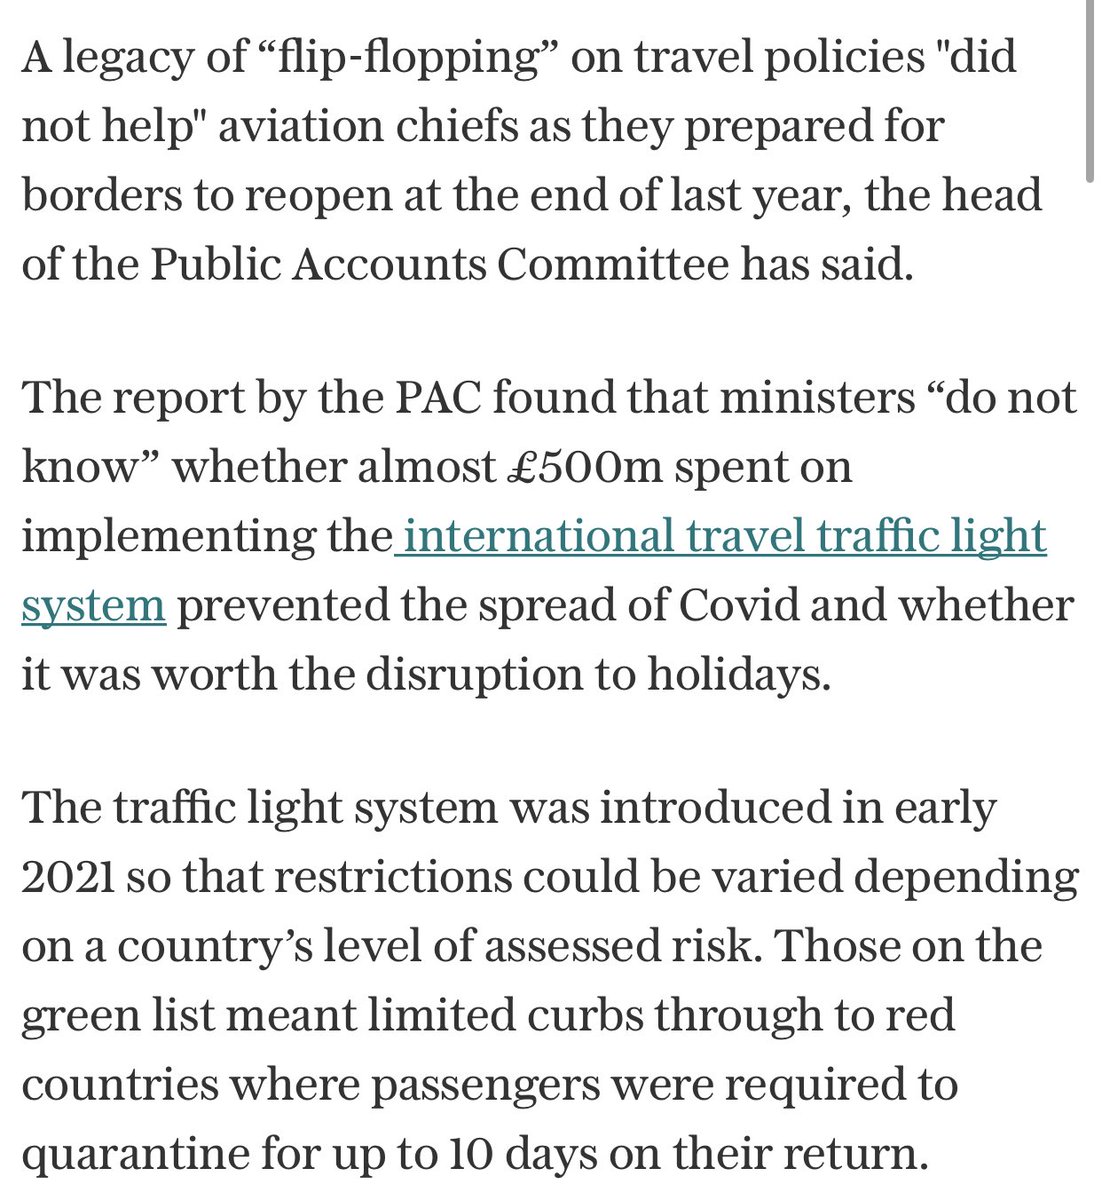 We were inundated with evidence suggesting that the UK’s “flip-flopping” on COVID-related travel policies were mostly ineffective. It’s a shame light is only being shed on this now as we watch the disruption thousands of travellers are facing… telegraph.co.uk/business/2022/…